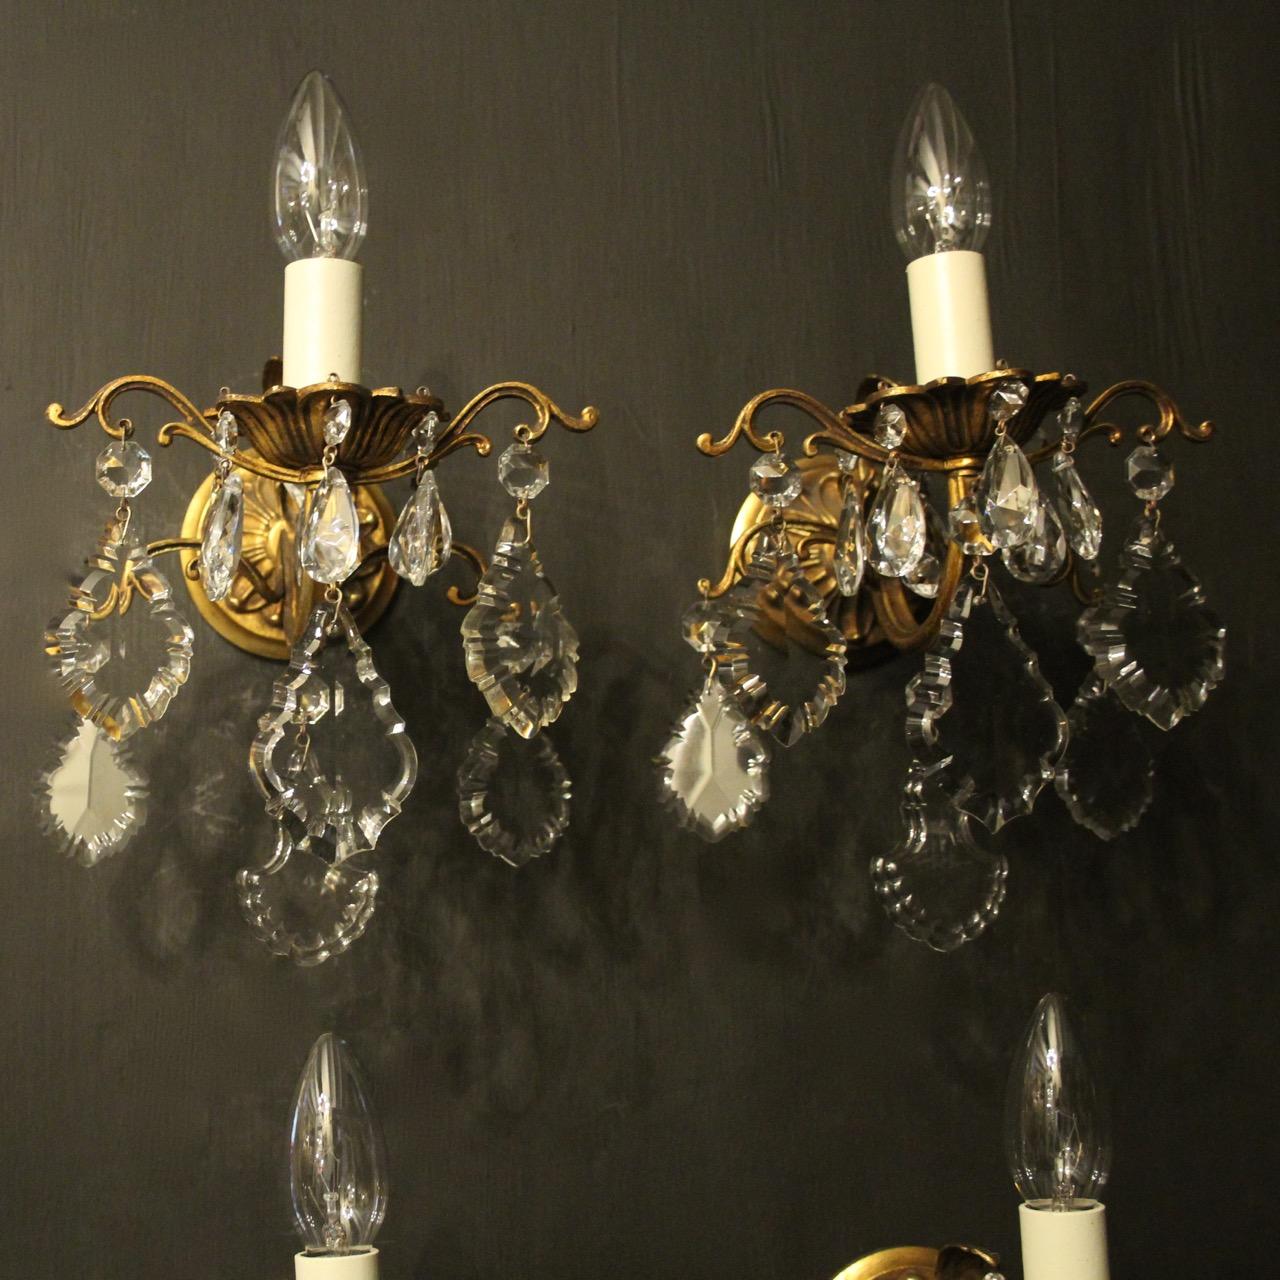 A French set of 4 gilded brass and crystal single arm antique wall lights, the scrolling arms with leaf bobeche drip pans, issuing from a folited circular leaf backplate and decorated overall with French Slab crystal faceted pendants, nice scale